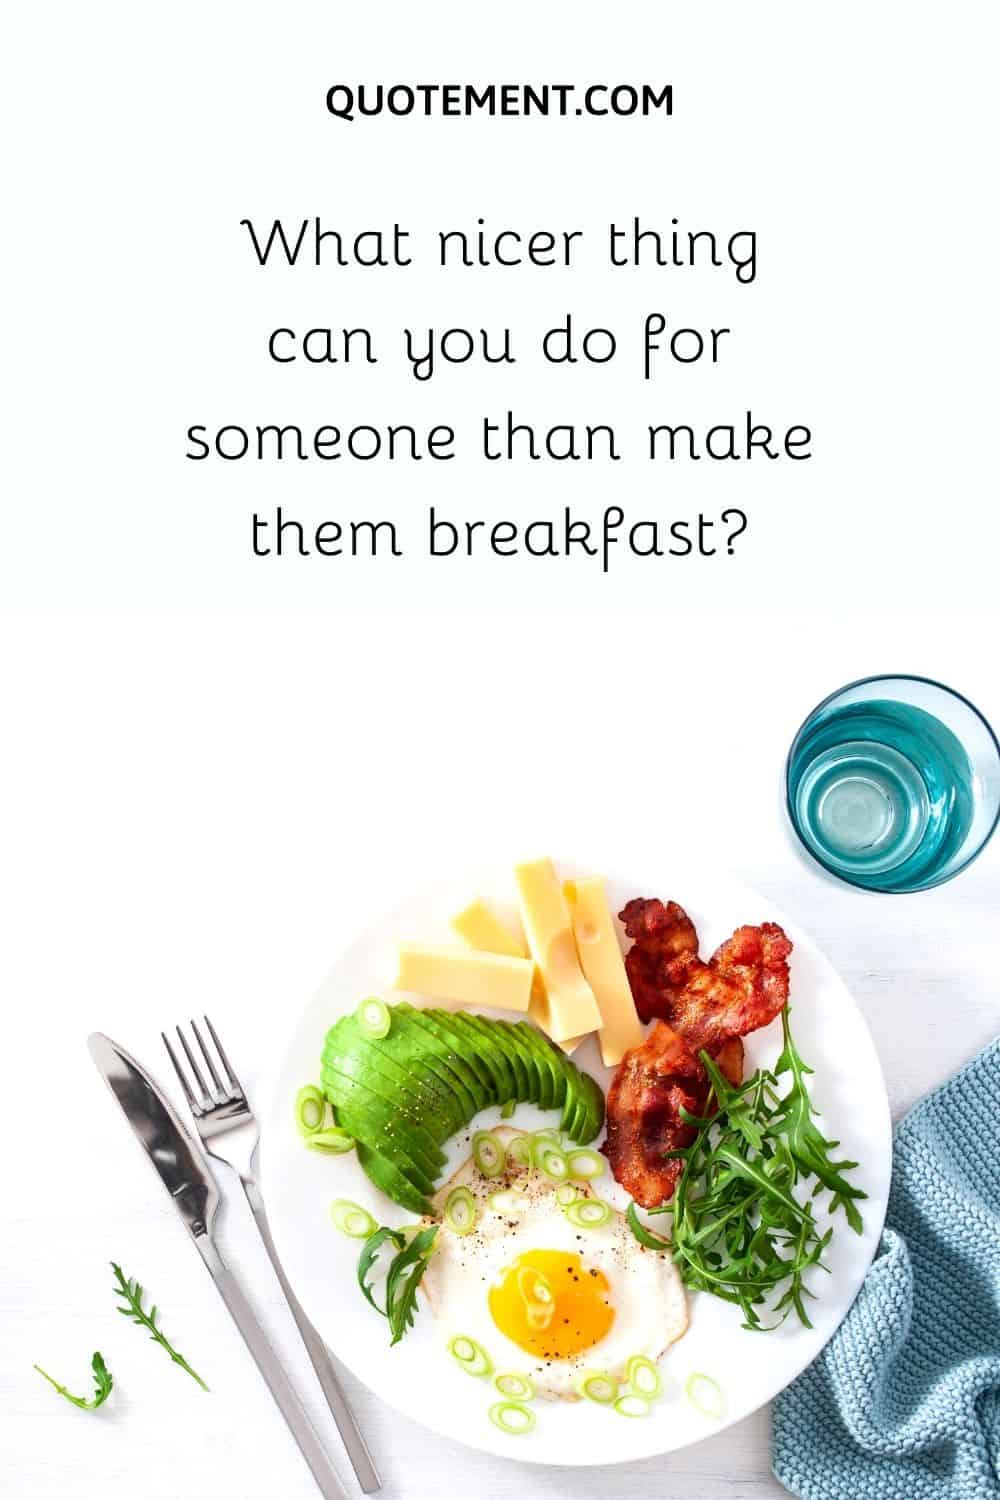 What nicer thing can you do for someone than make them breakfast